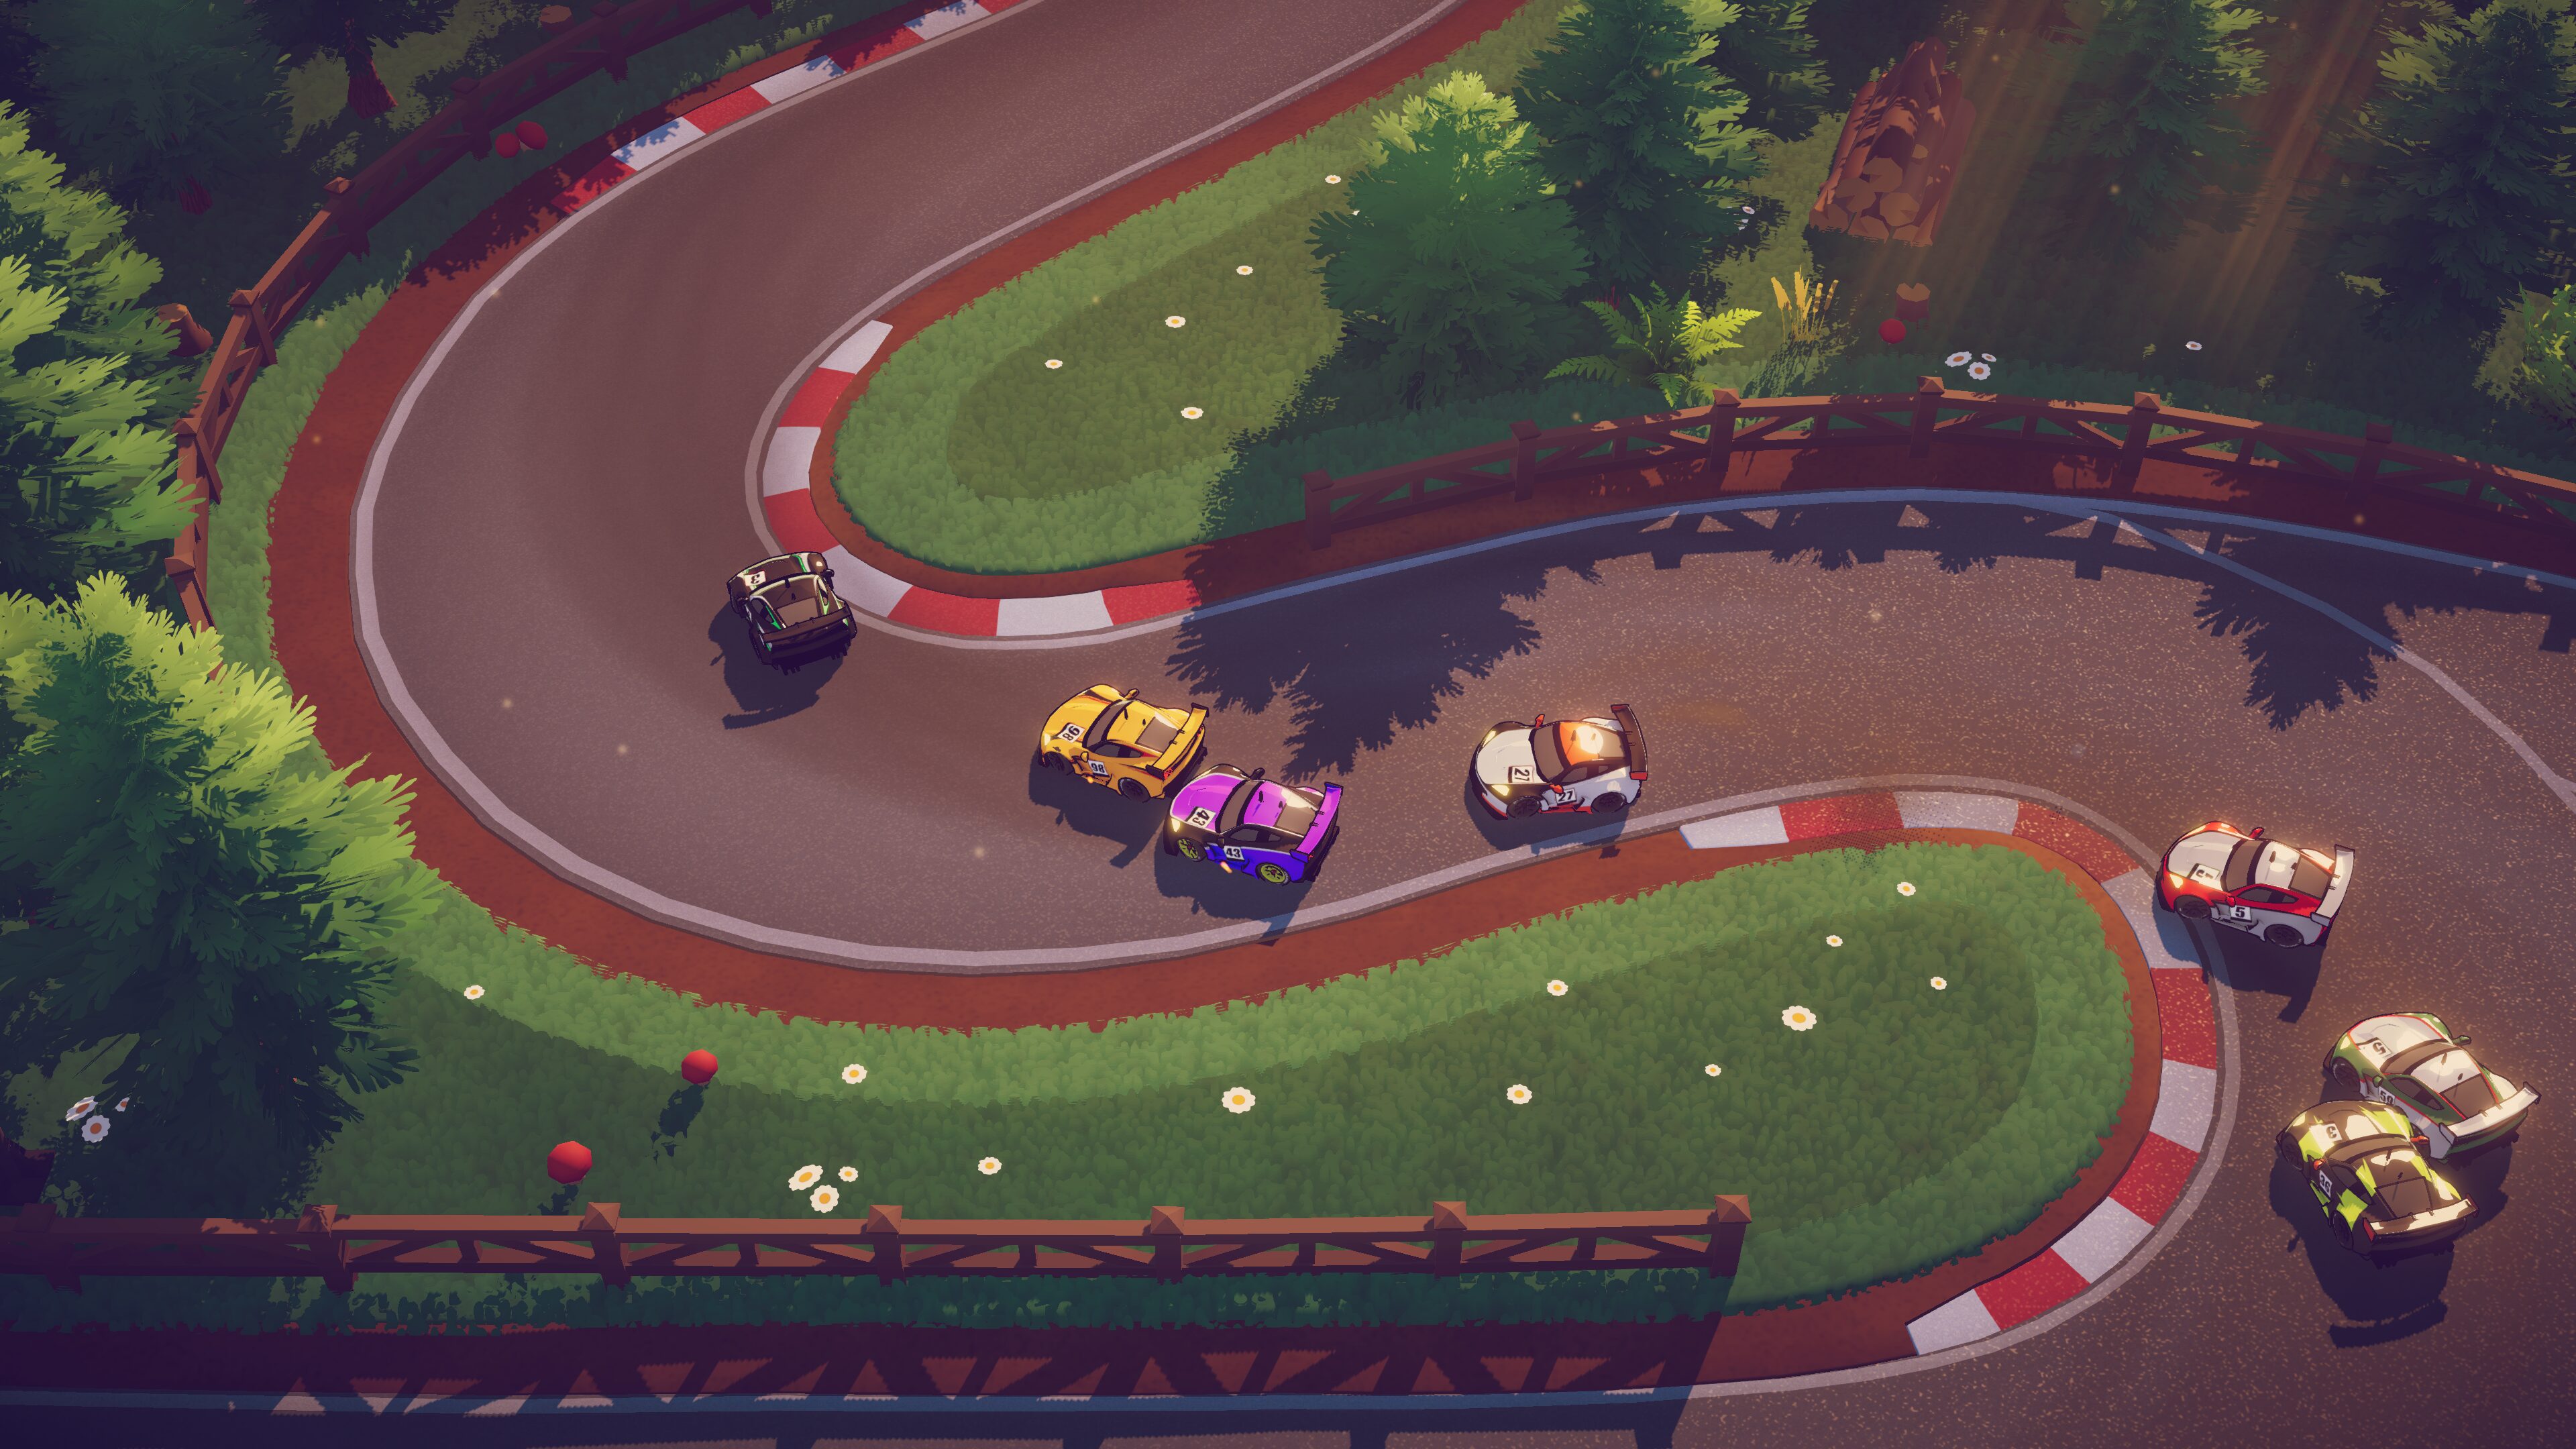 E3 2019: Square Enix gets into the racing game with Circuit Superstars